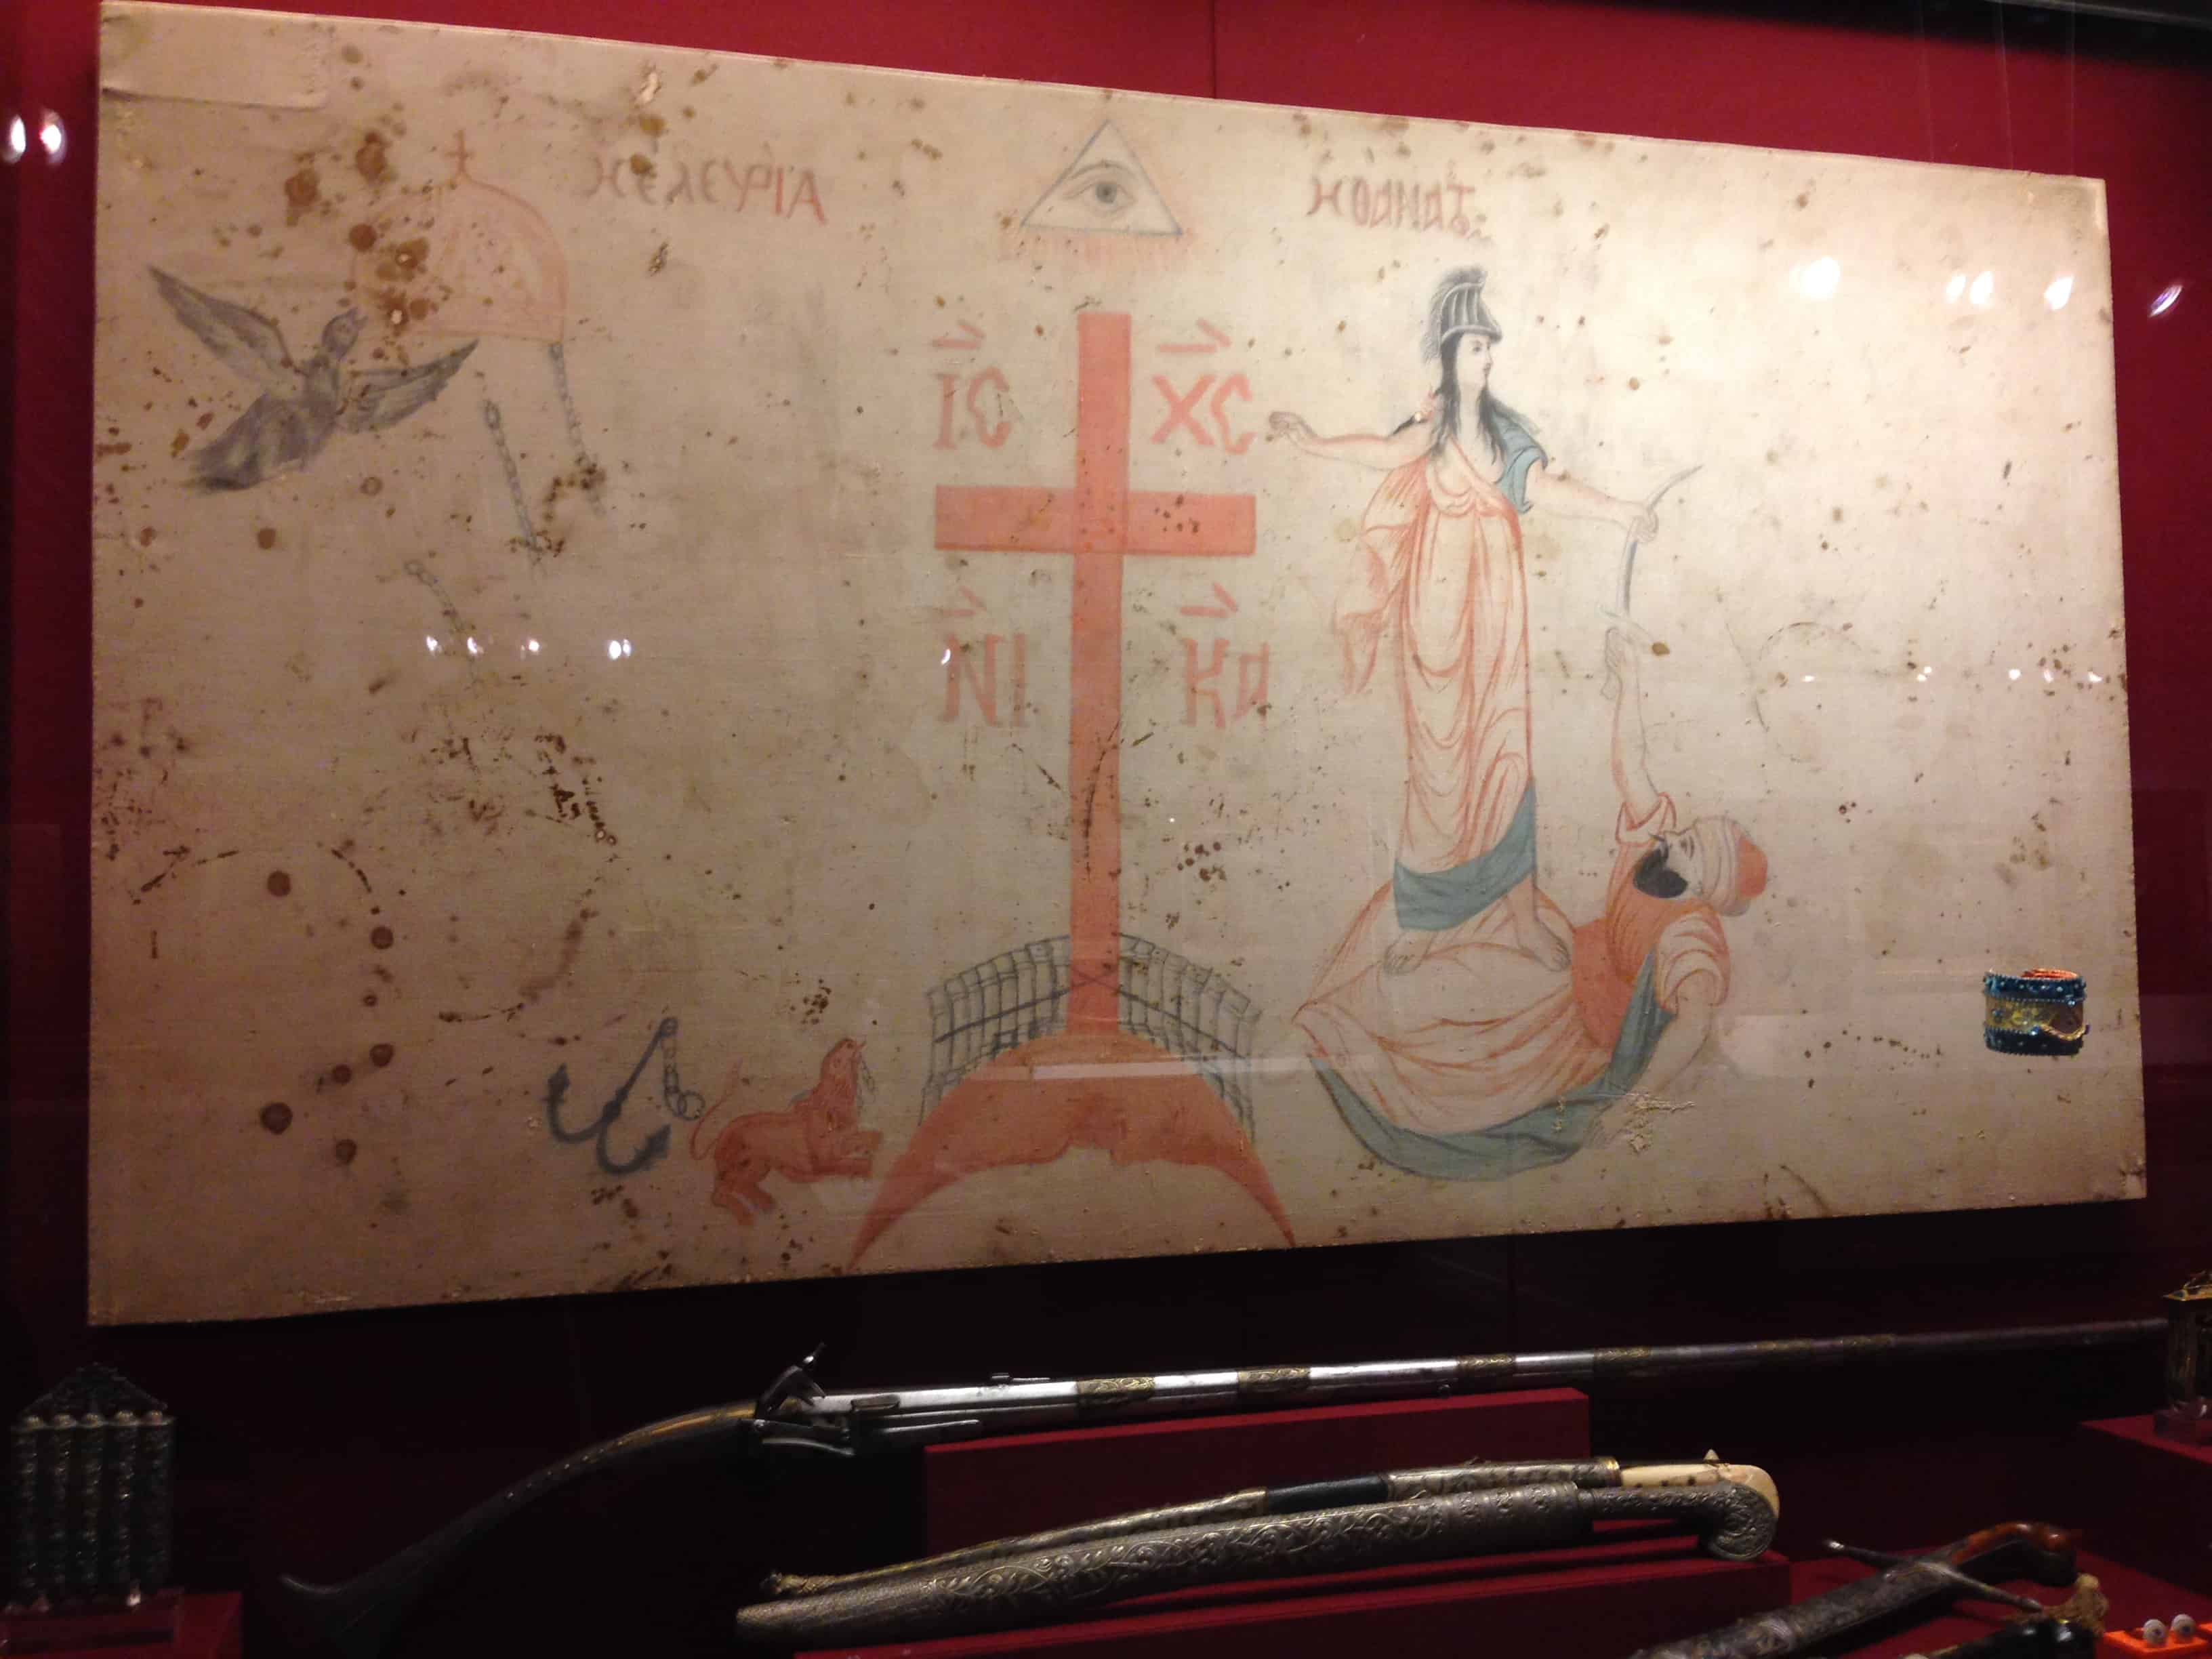 A flag belonging to Theodoros Kolokotronis at the Benaki Museum of Greek Culture in Athens, Greece